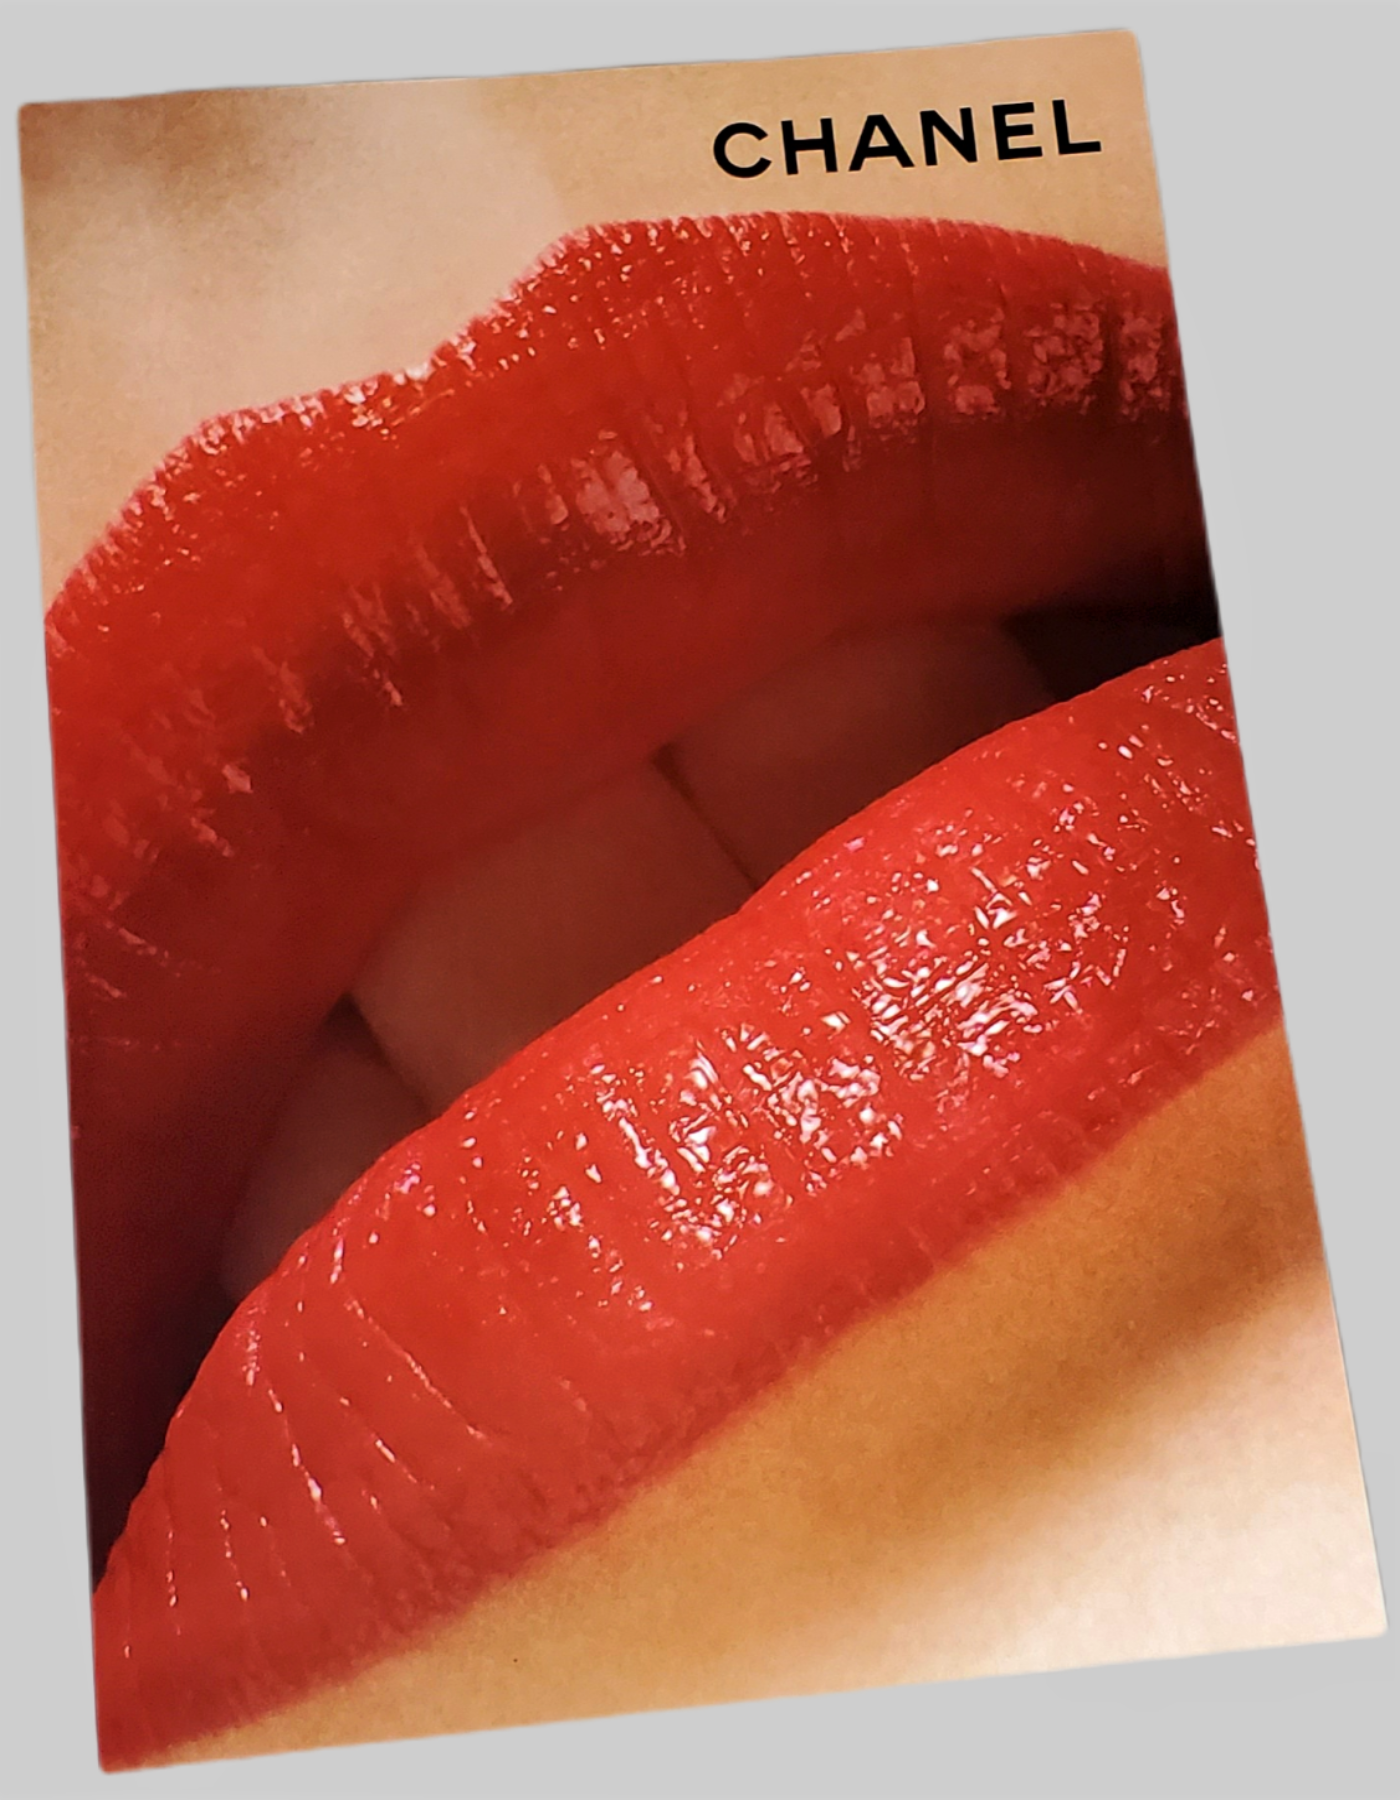 Authentic Chanel Rouge Coco Lip Color advertisement page featured in 2012 fashion issue of Vogue magazine available in area51gallery